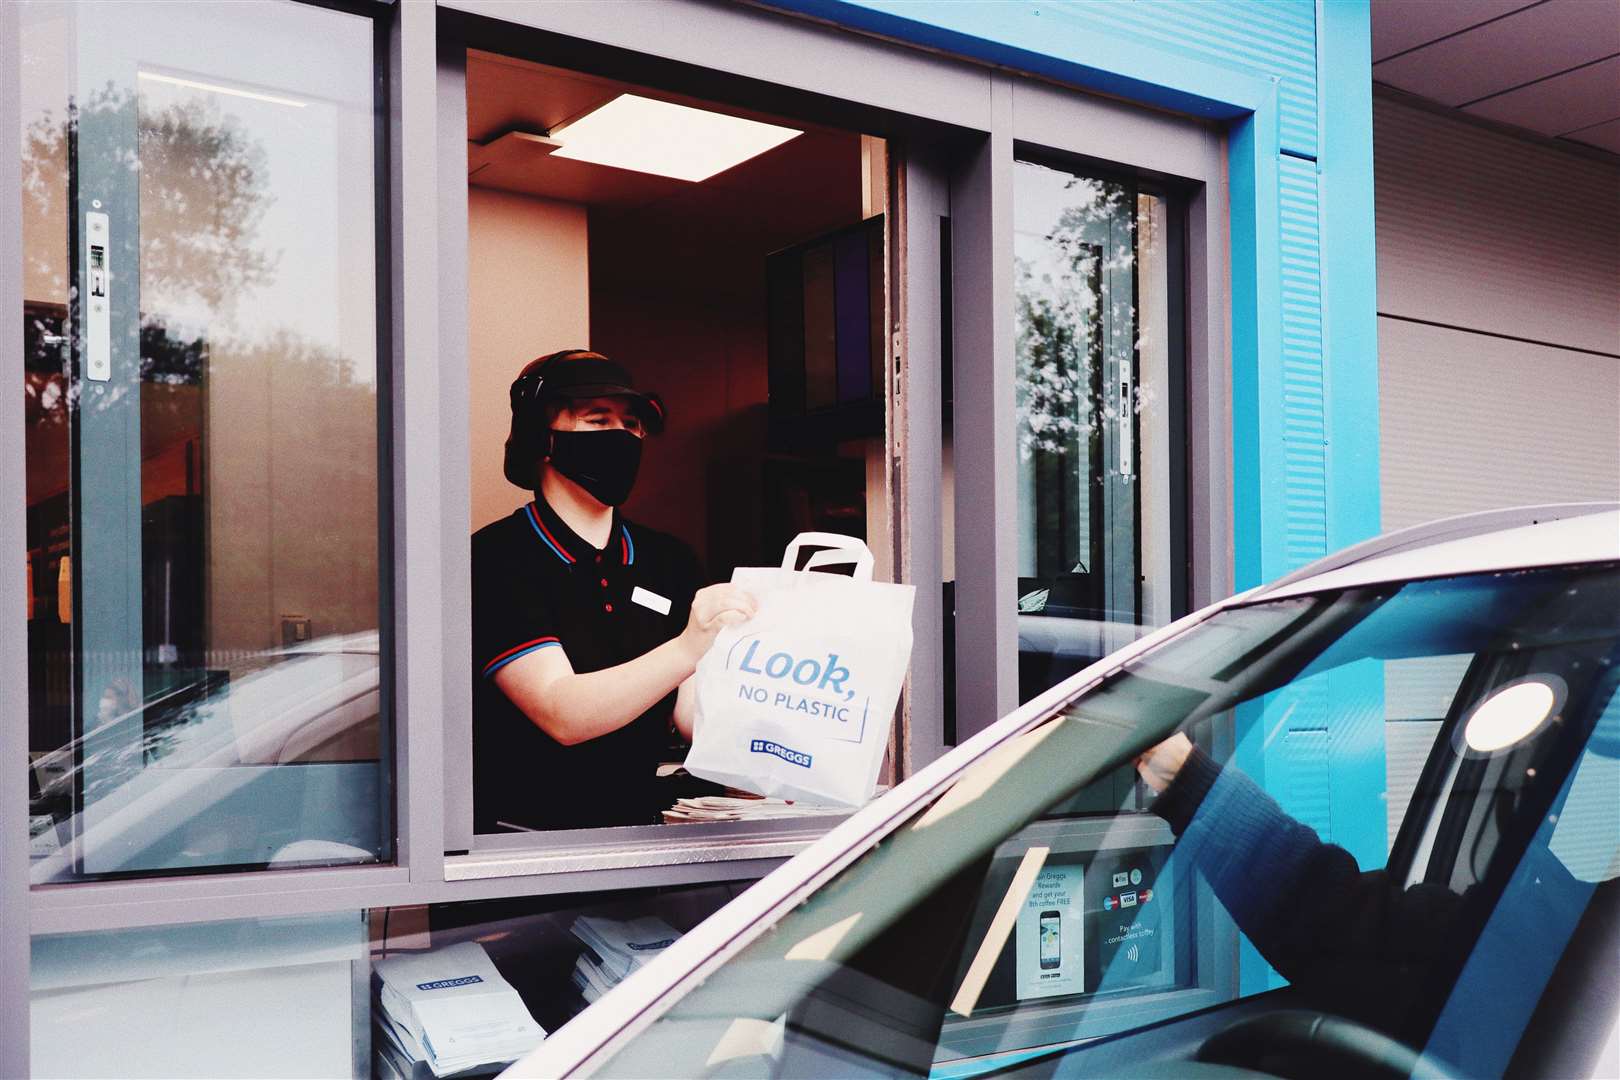 A Greggs drive-thru is coming to Sittingbourne